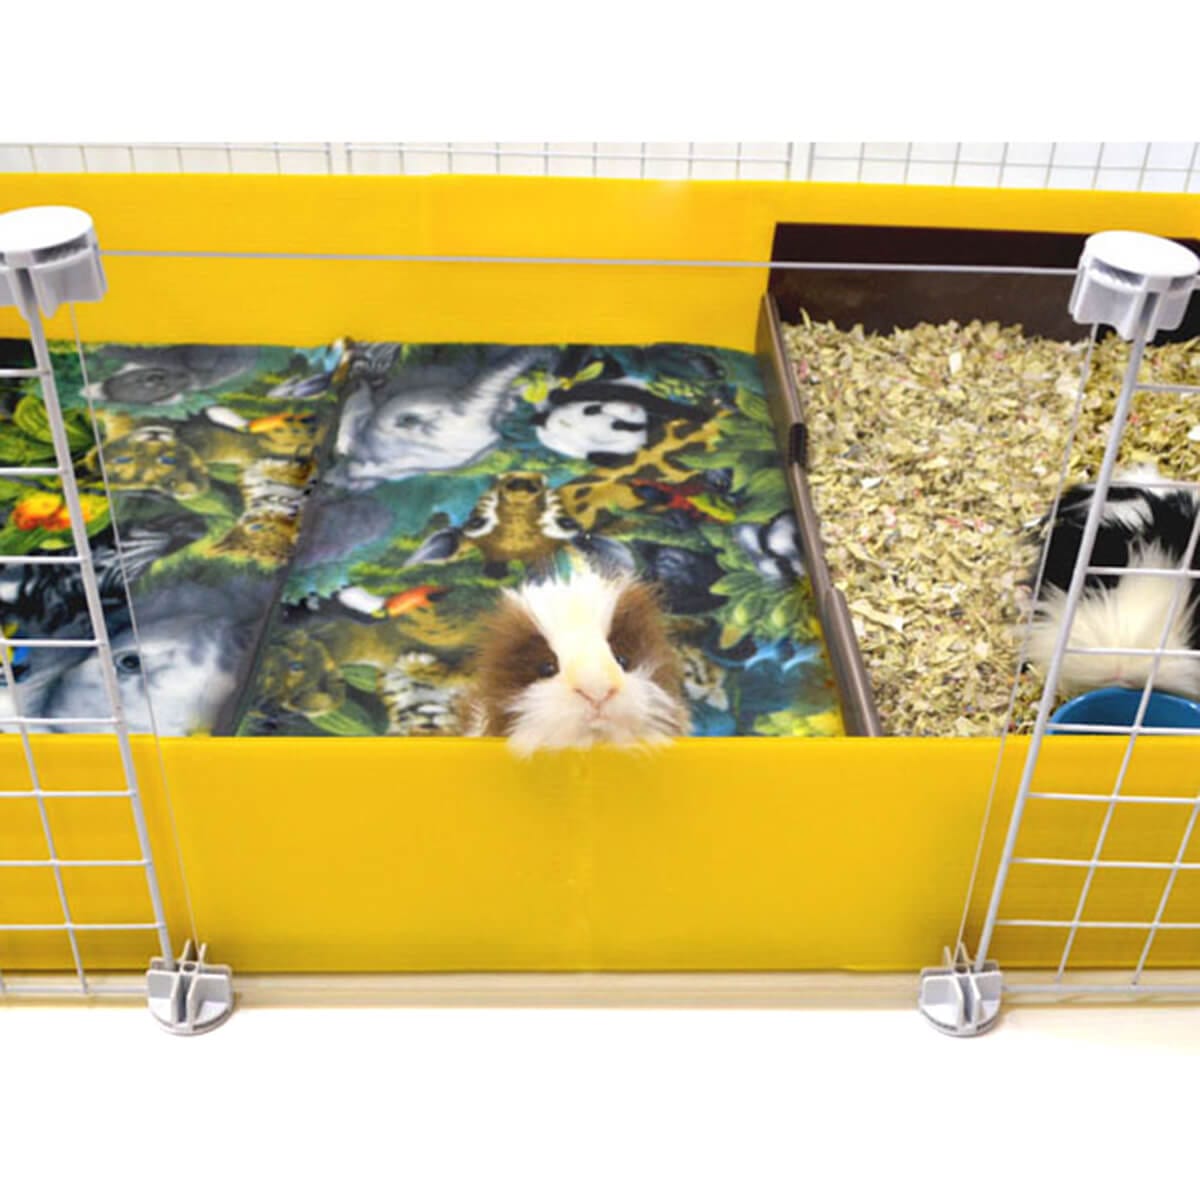 Full size window replacing a grid for a yellow C&C guinea pig cage